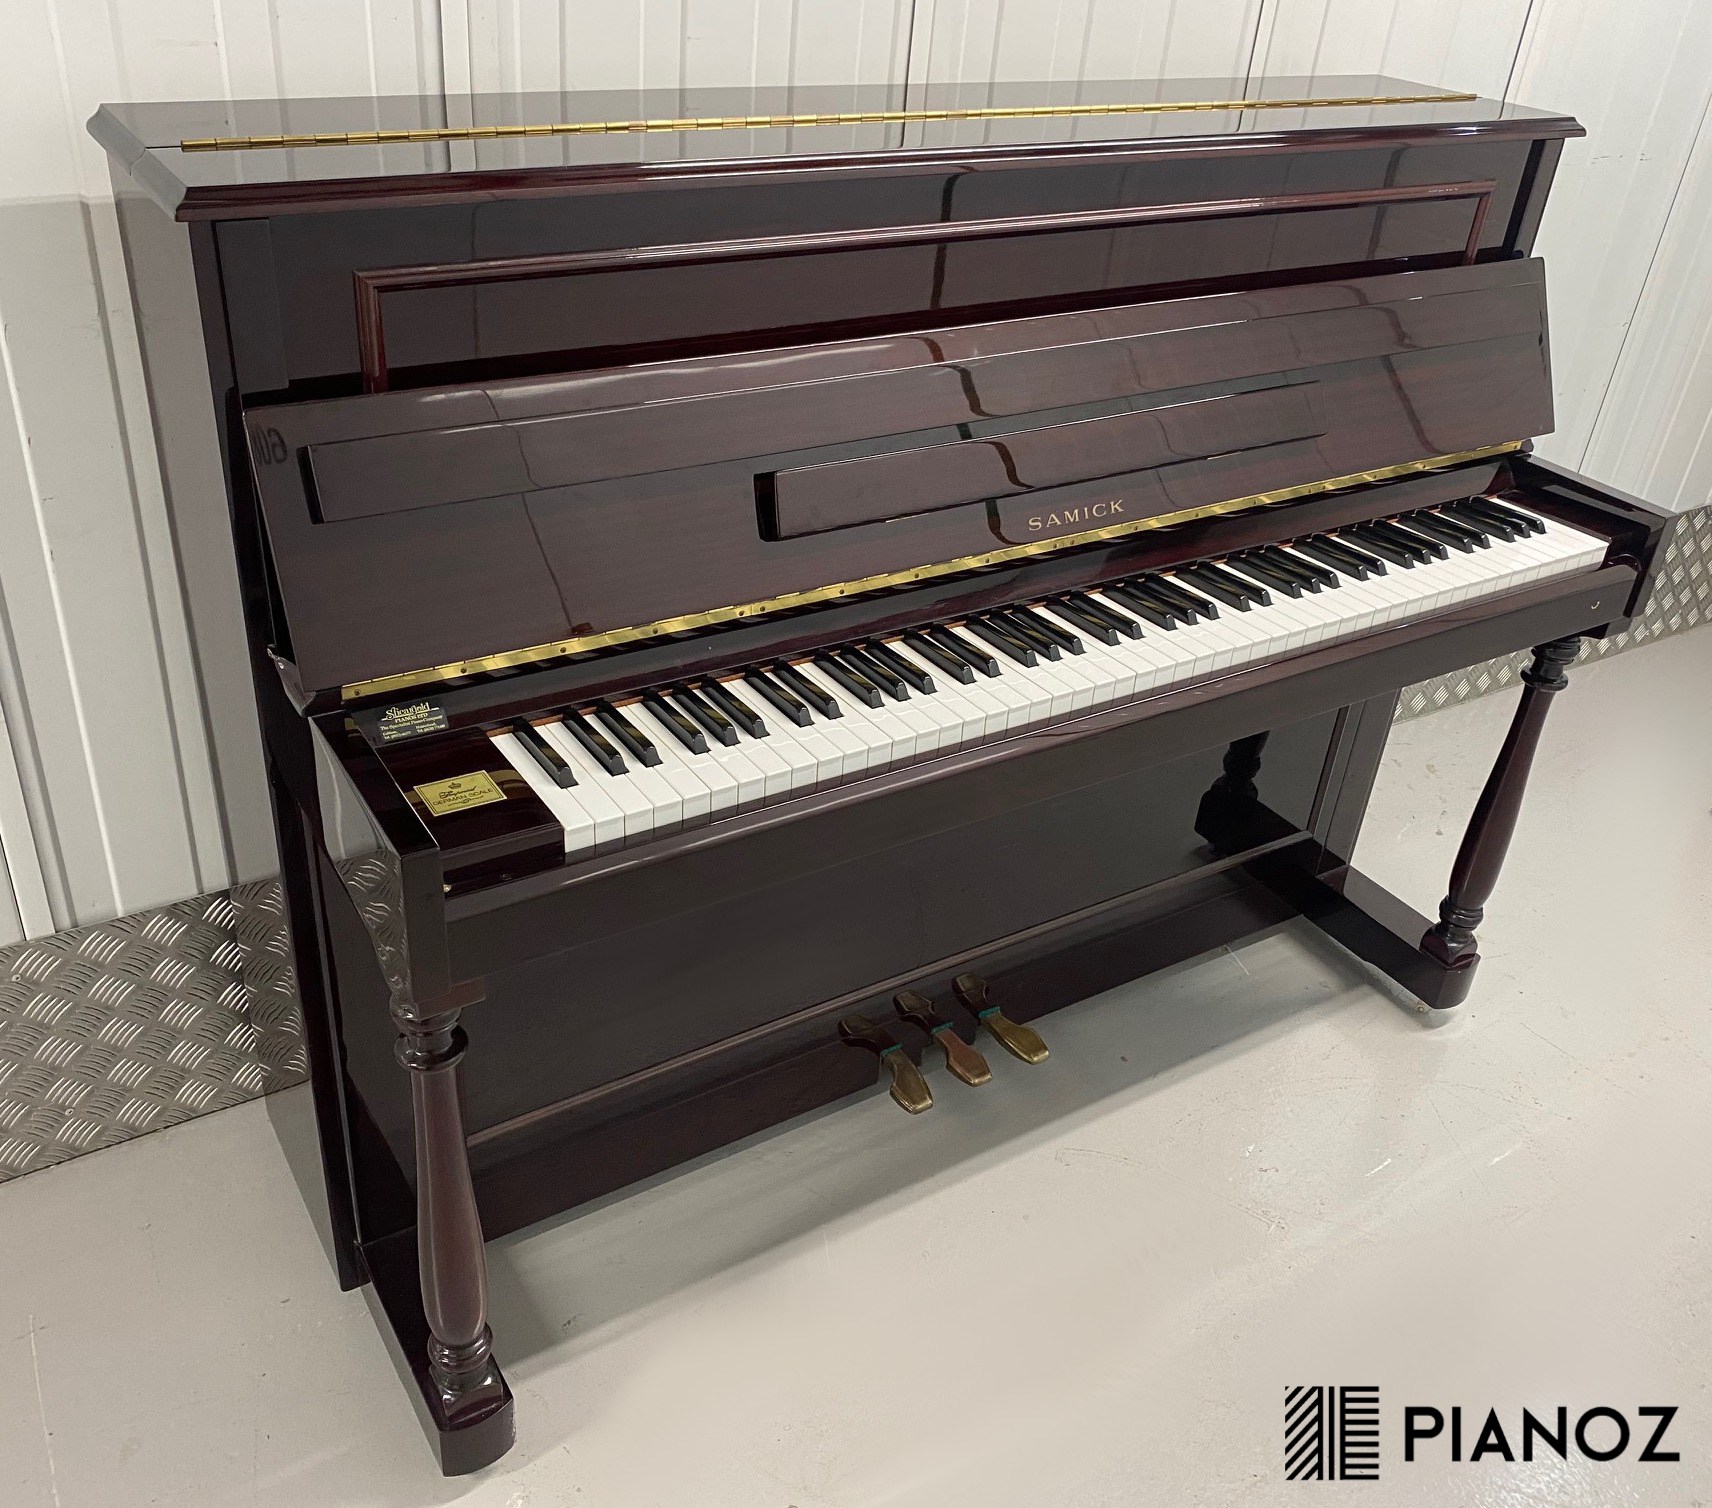 Samick 110 High Gloss Upright Piano piano for sale in UK